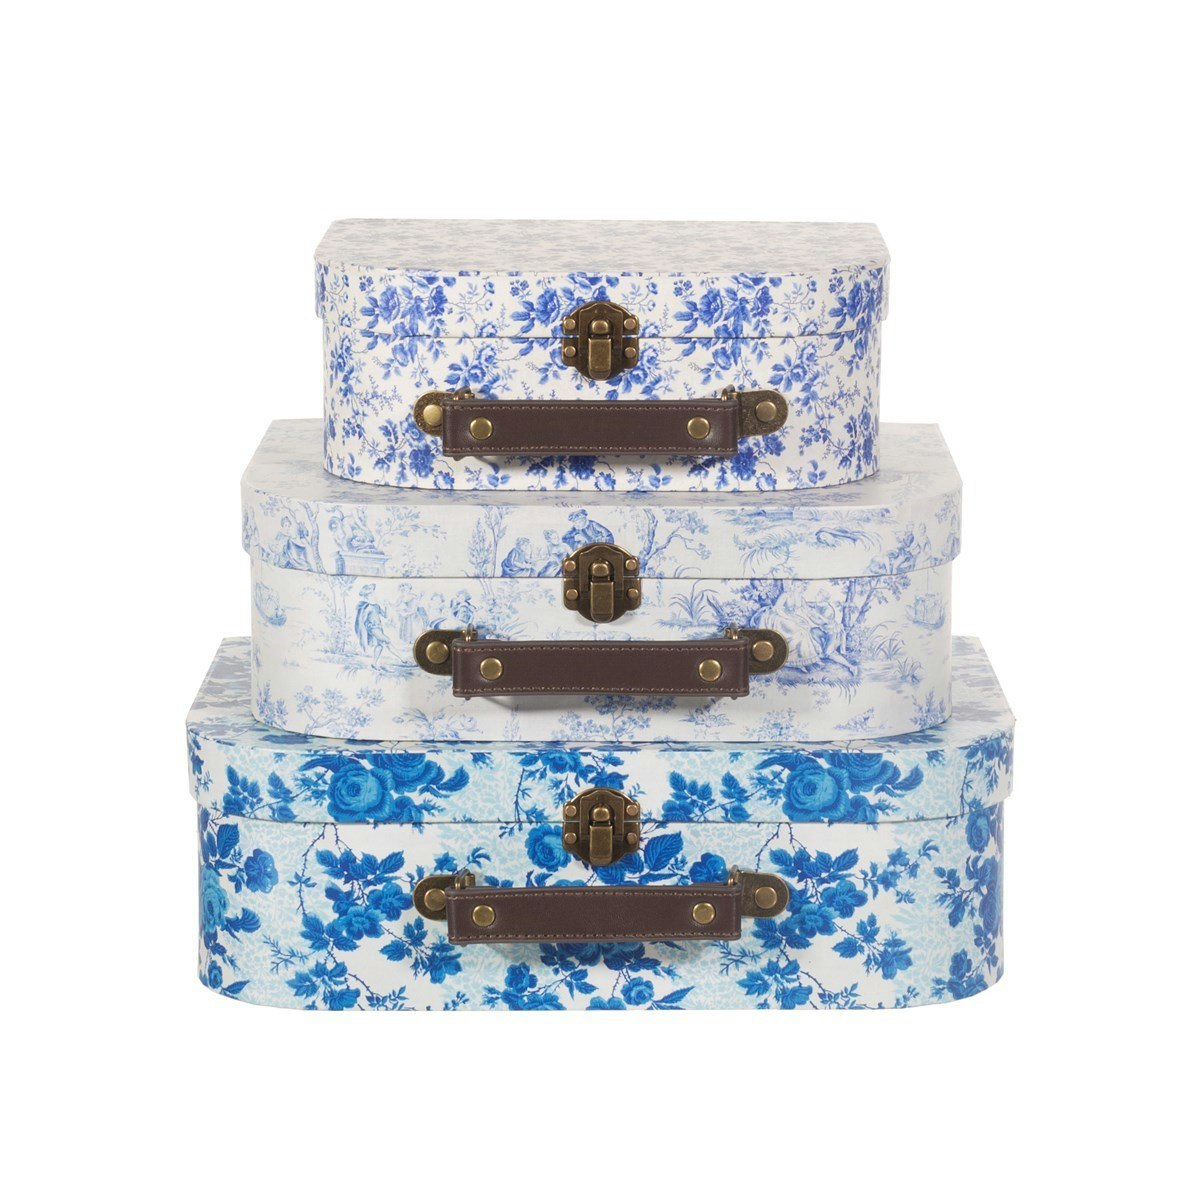 Sass & Belle, storage boxes Blue and white floral, set of 3 